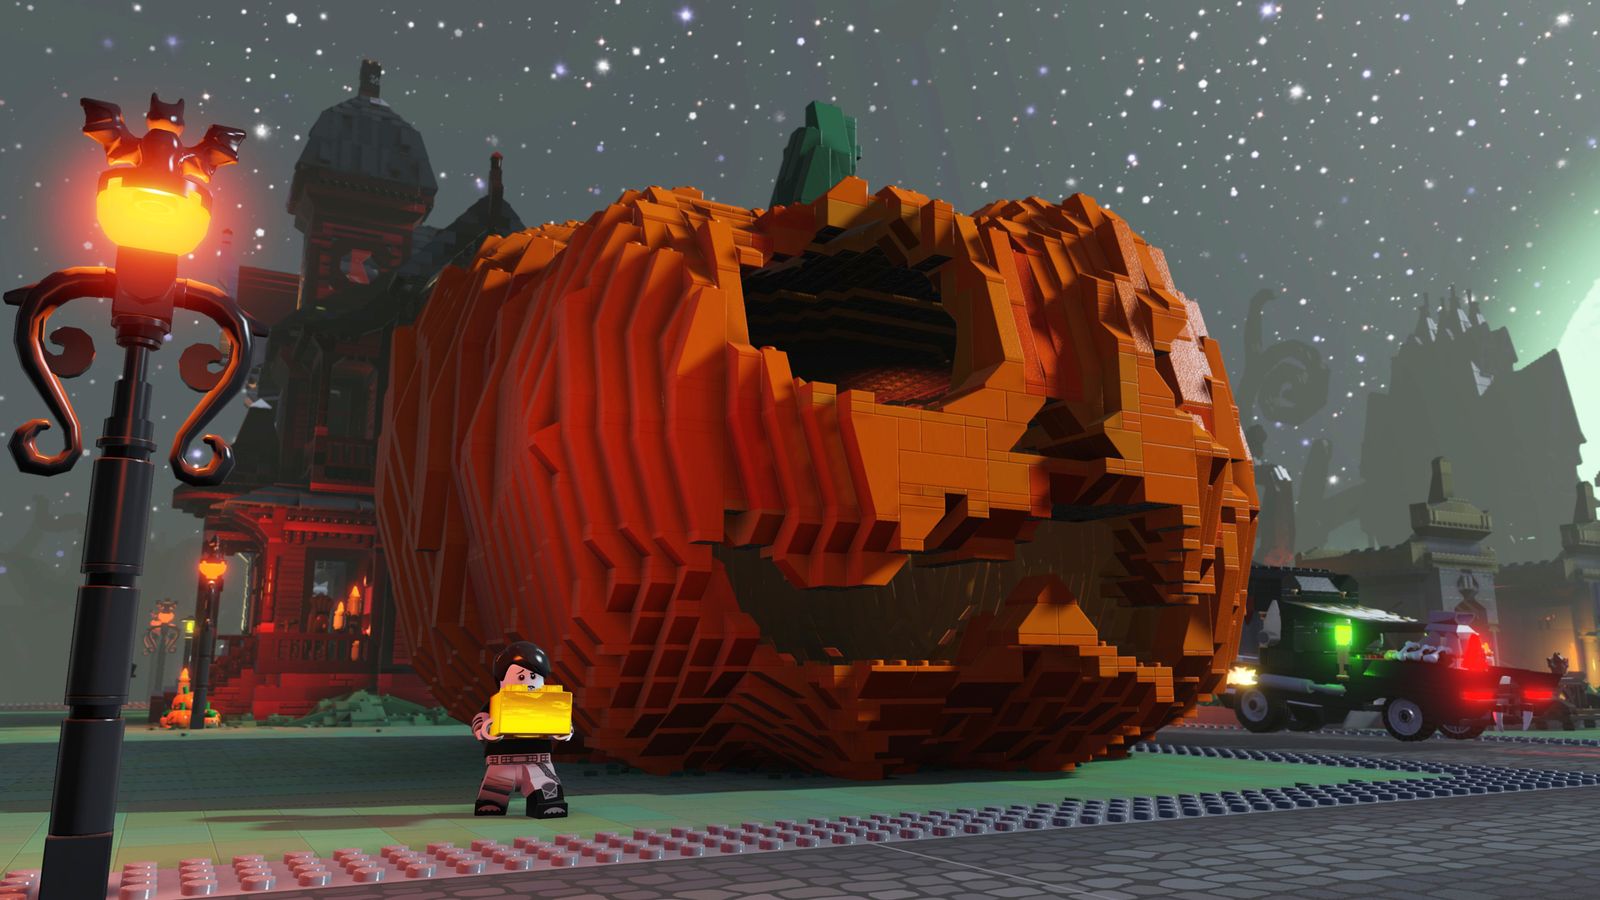 lego worlds download app store